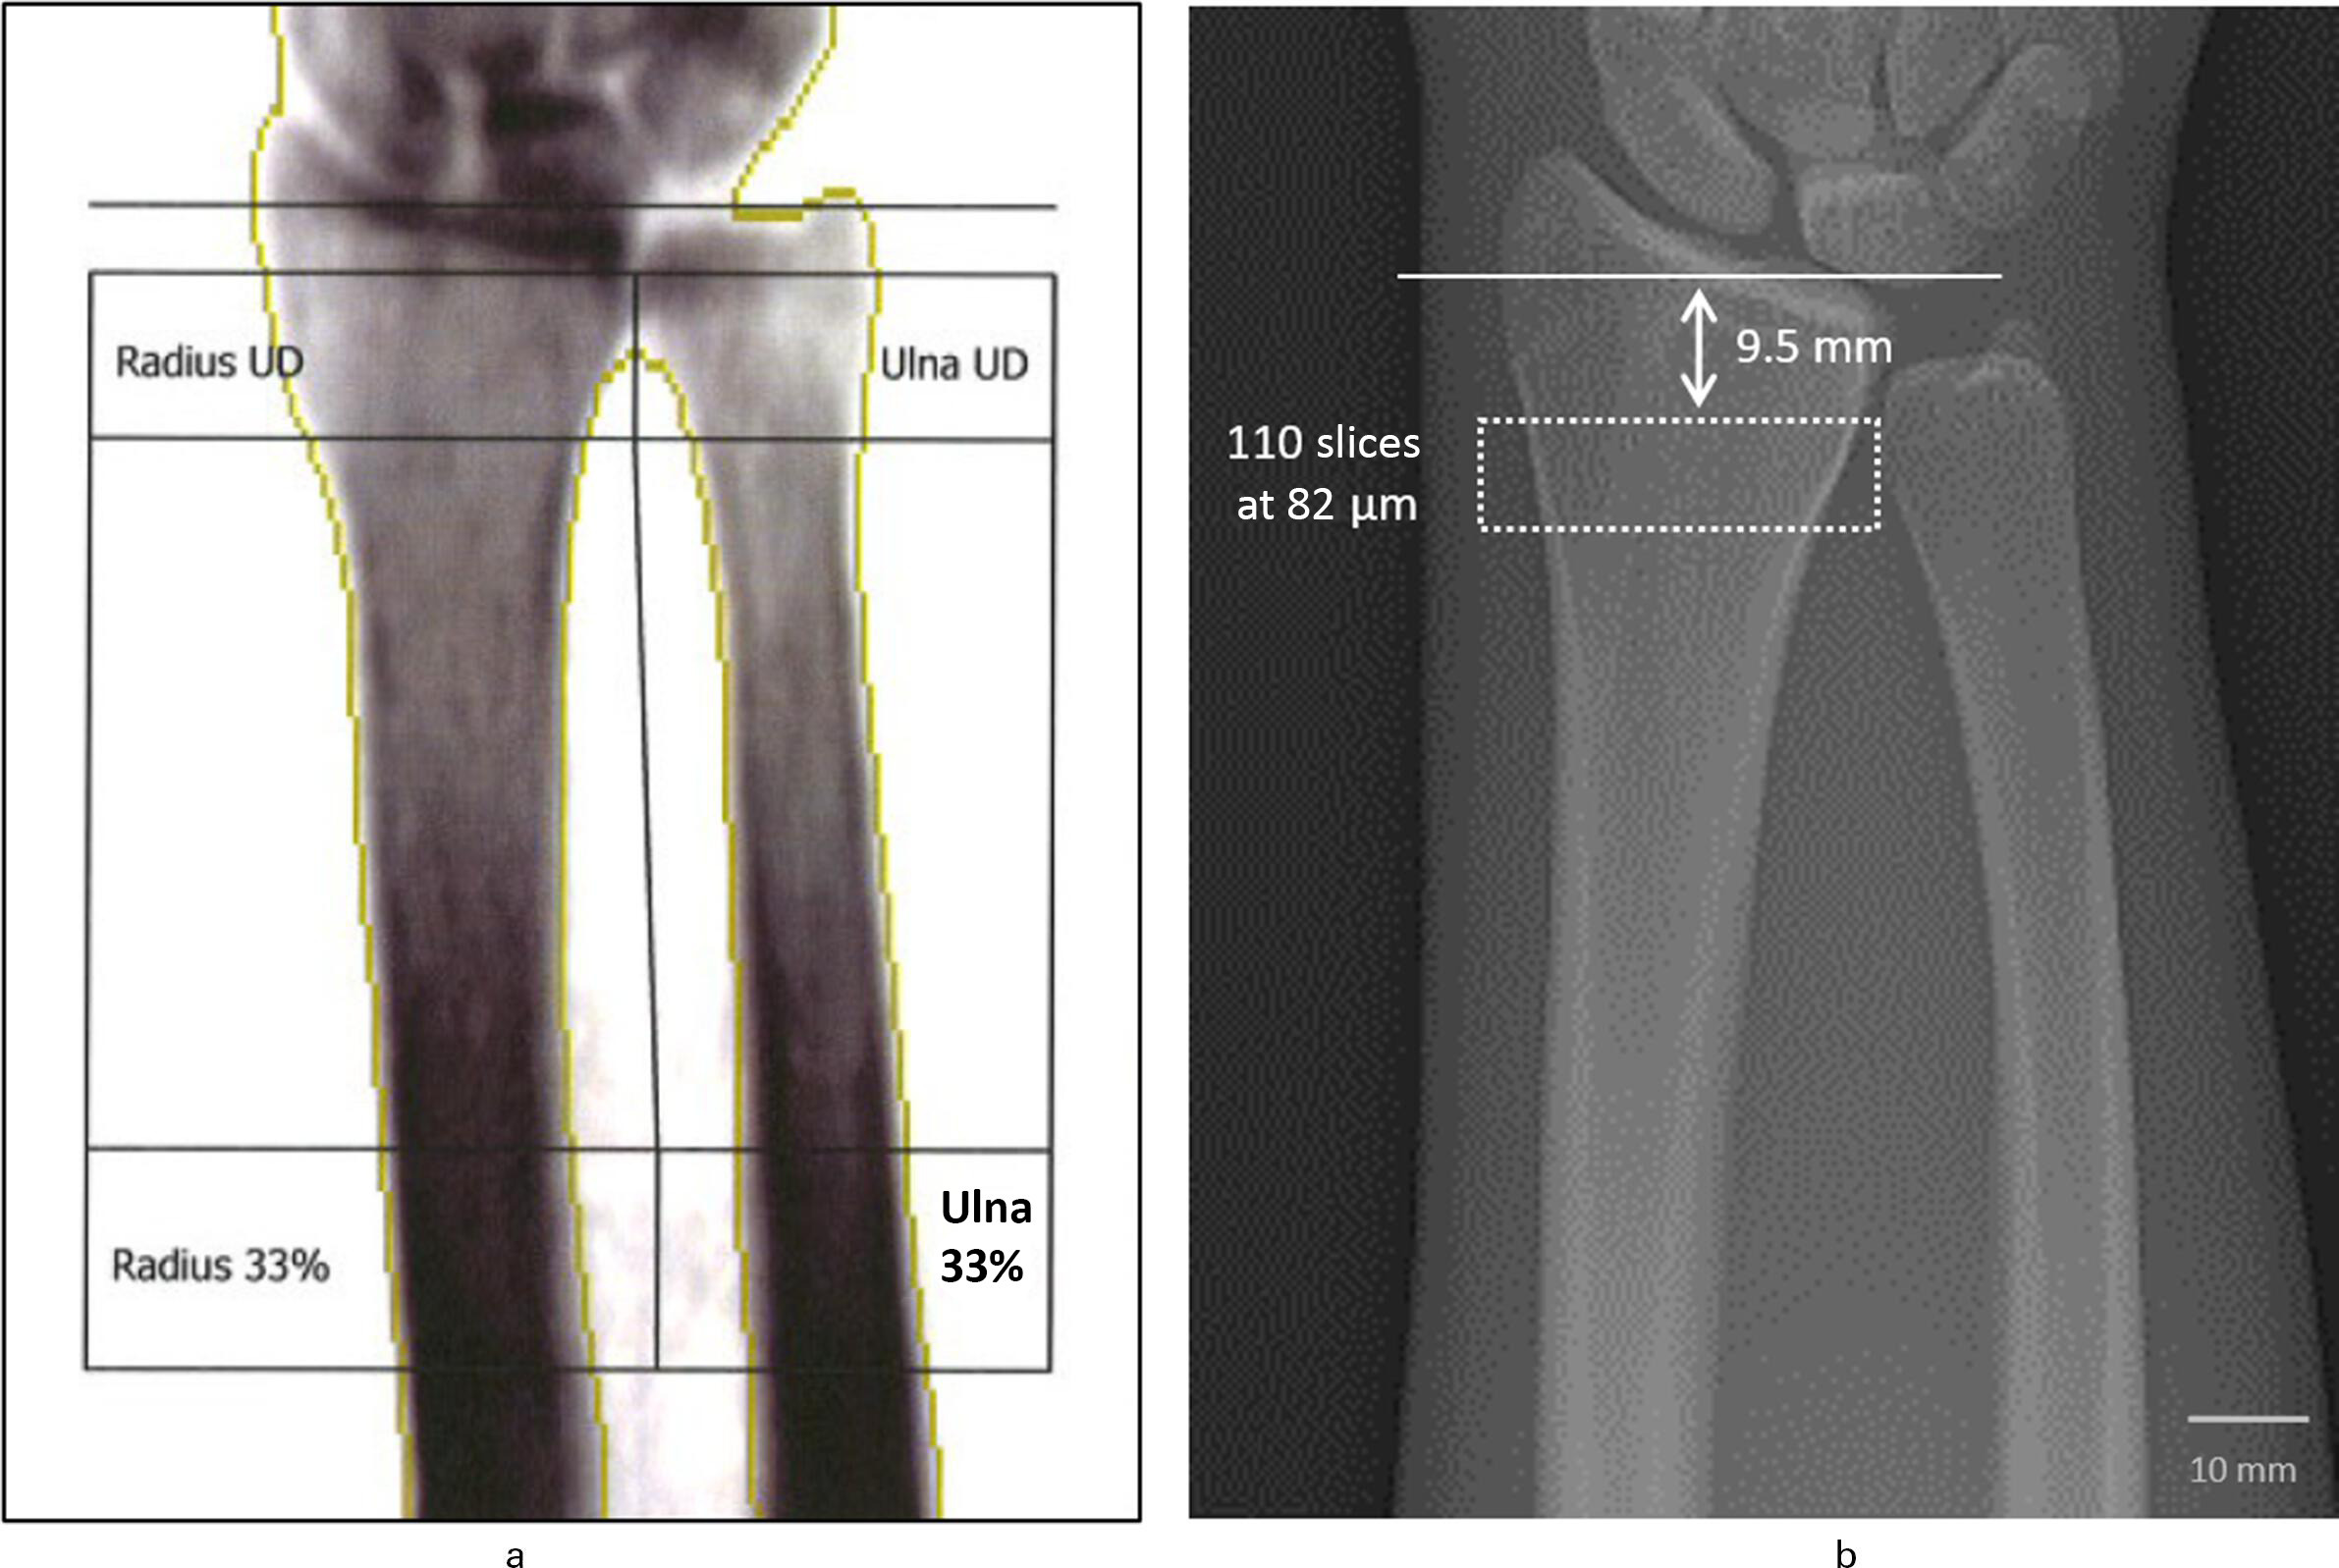 Fig. 1 
            Scanning region at the distal radius for measurement of the quantitative bone mineral density (BMD). a) Dual-energy X-ray absorptiometry (DXA) measuring the areal BMD (aBMD) (g/cm2) of the radius. For the radial aBMD, the ultra-distal region (radius UD) and one-third distal region (radius 33%) were included. b) High-resolution peripheral quantitative CT (HR-pQCT) (resolution of 82 µm) measuring the volumetric BMD (vBMD) (mgHA/cm3) of the radius. The scanning region includes 110 slices with a nominal voxel size of 82 µm starting 9.5 mm from the inflection point of the distal radius endplate.
          